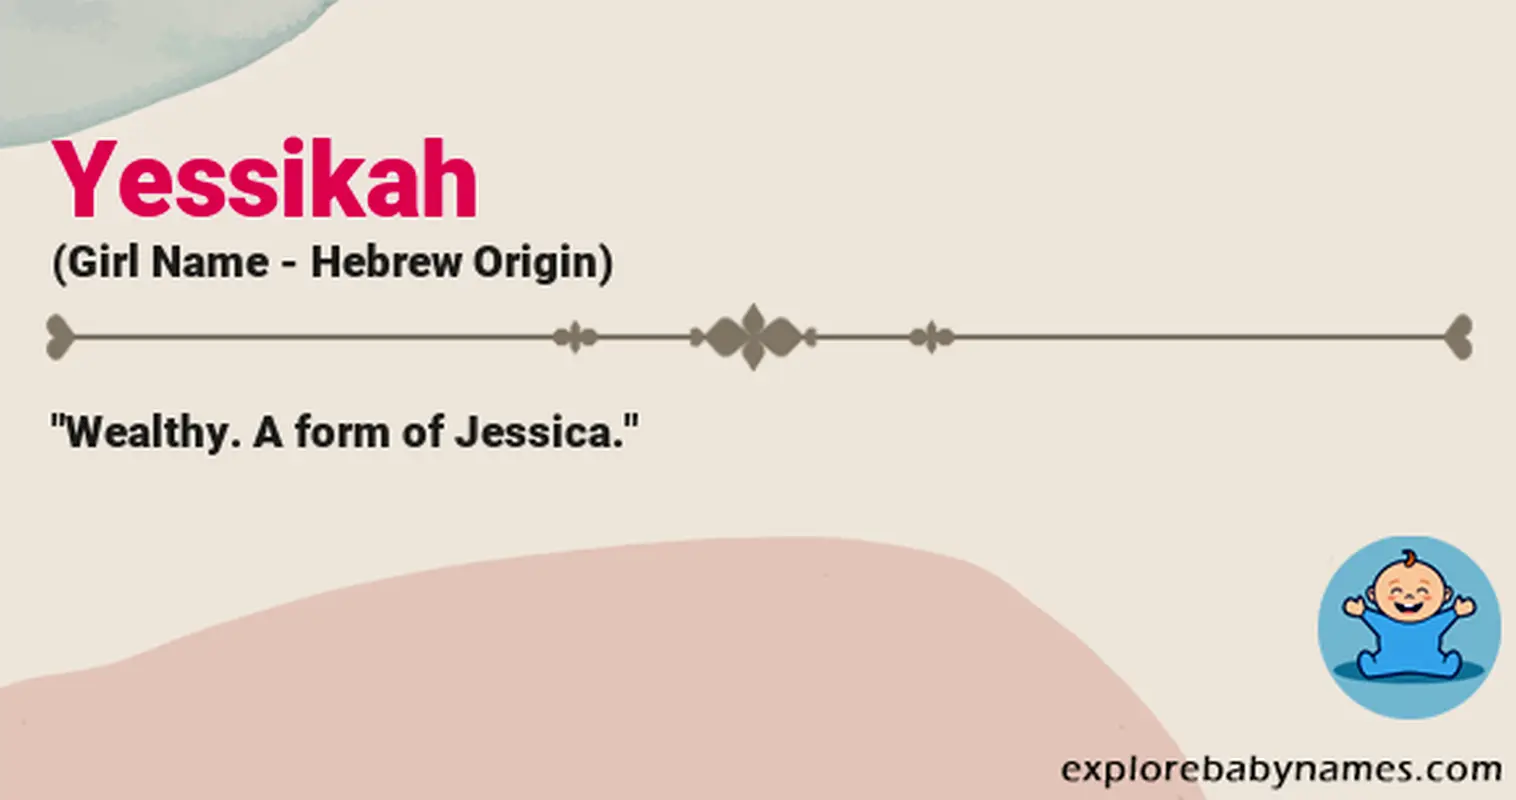 Meaning of Yessikah